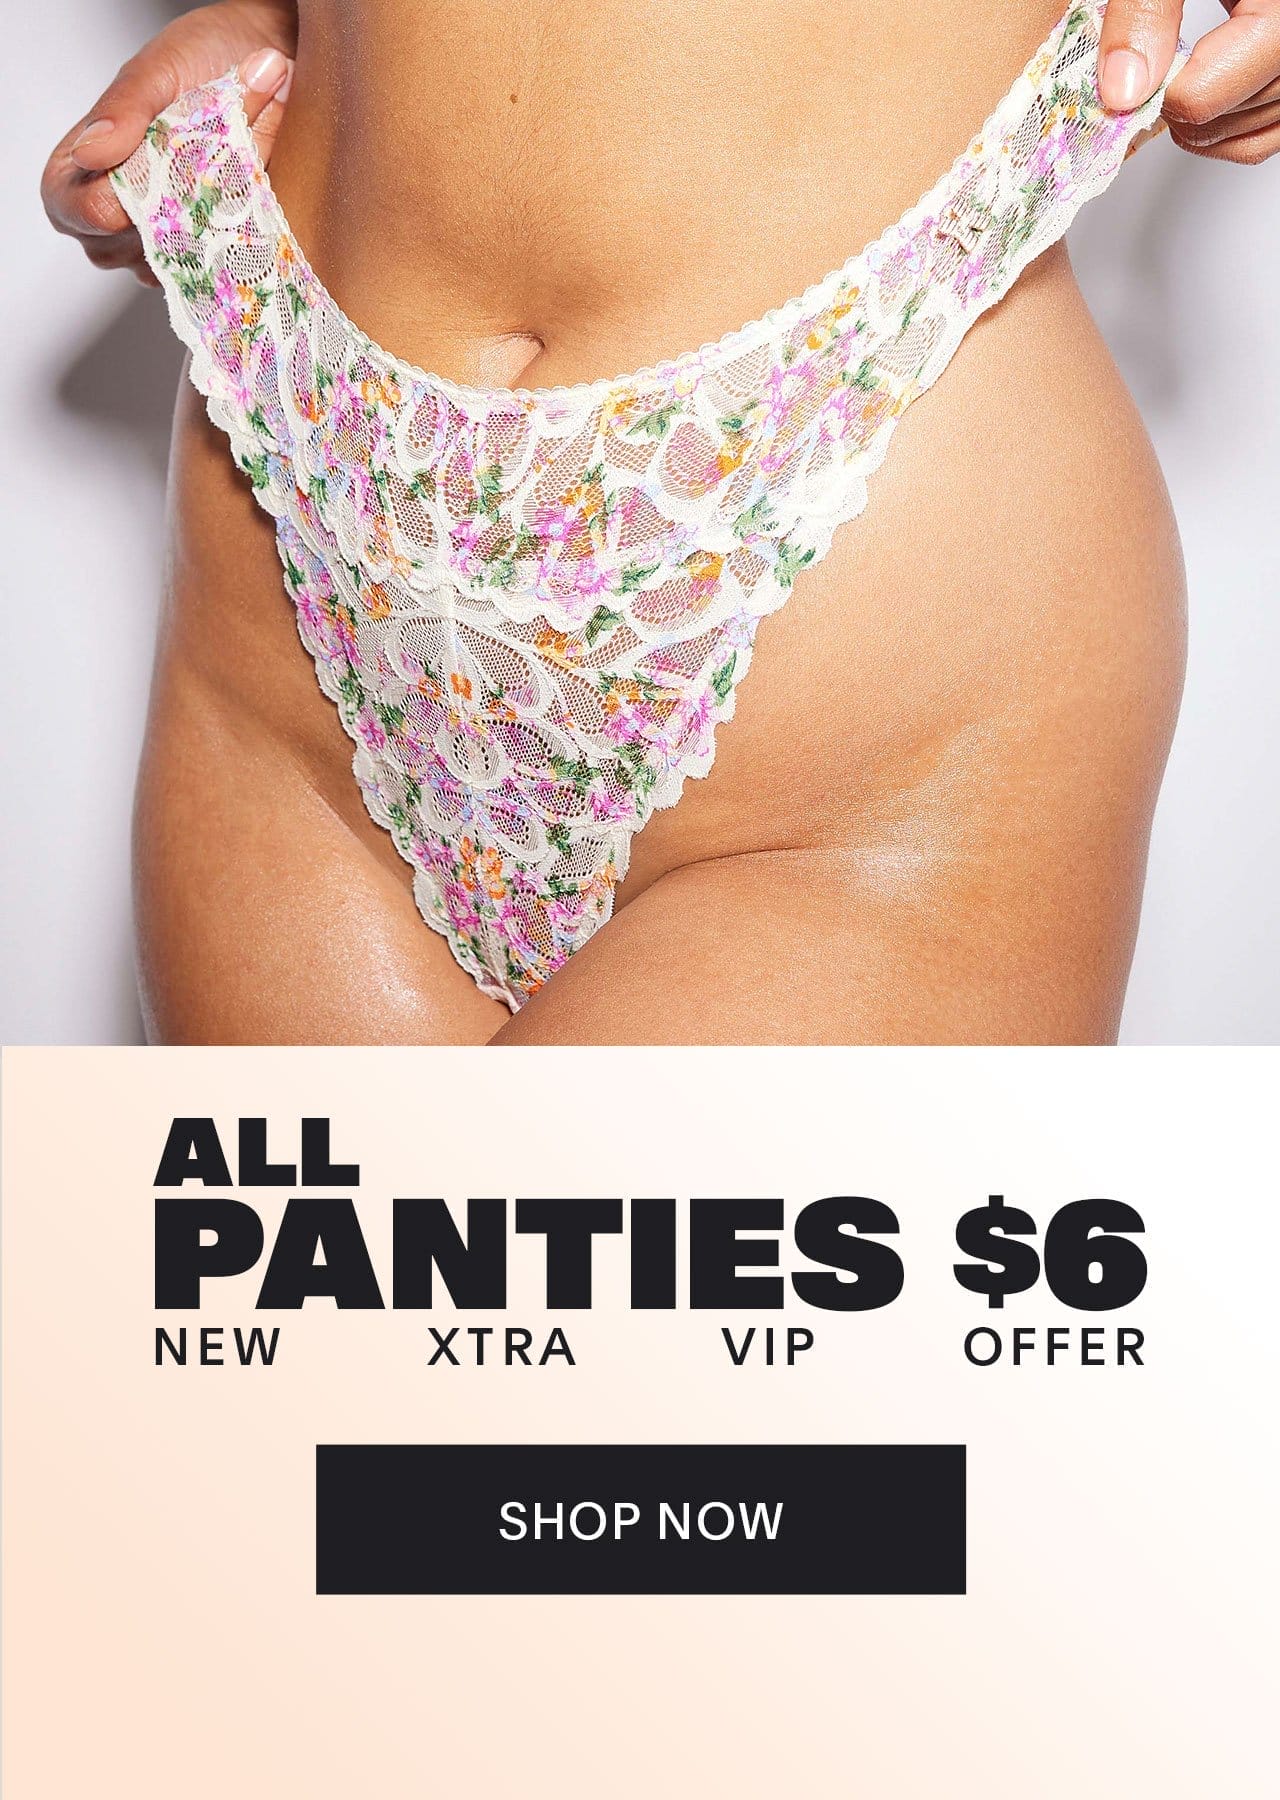 New Xtra VIP Offer: All Panties \\$6